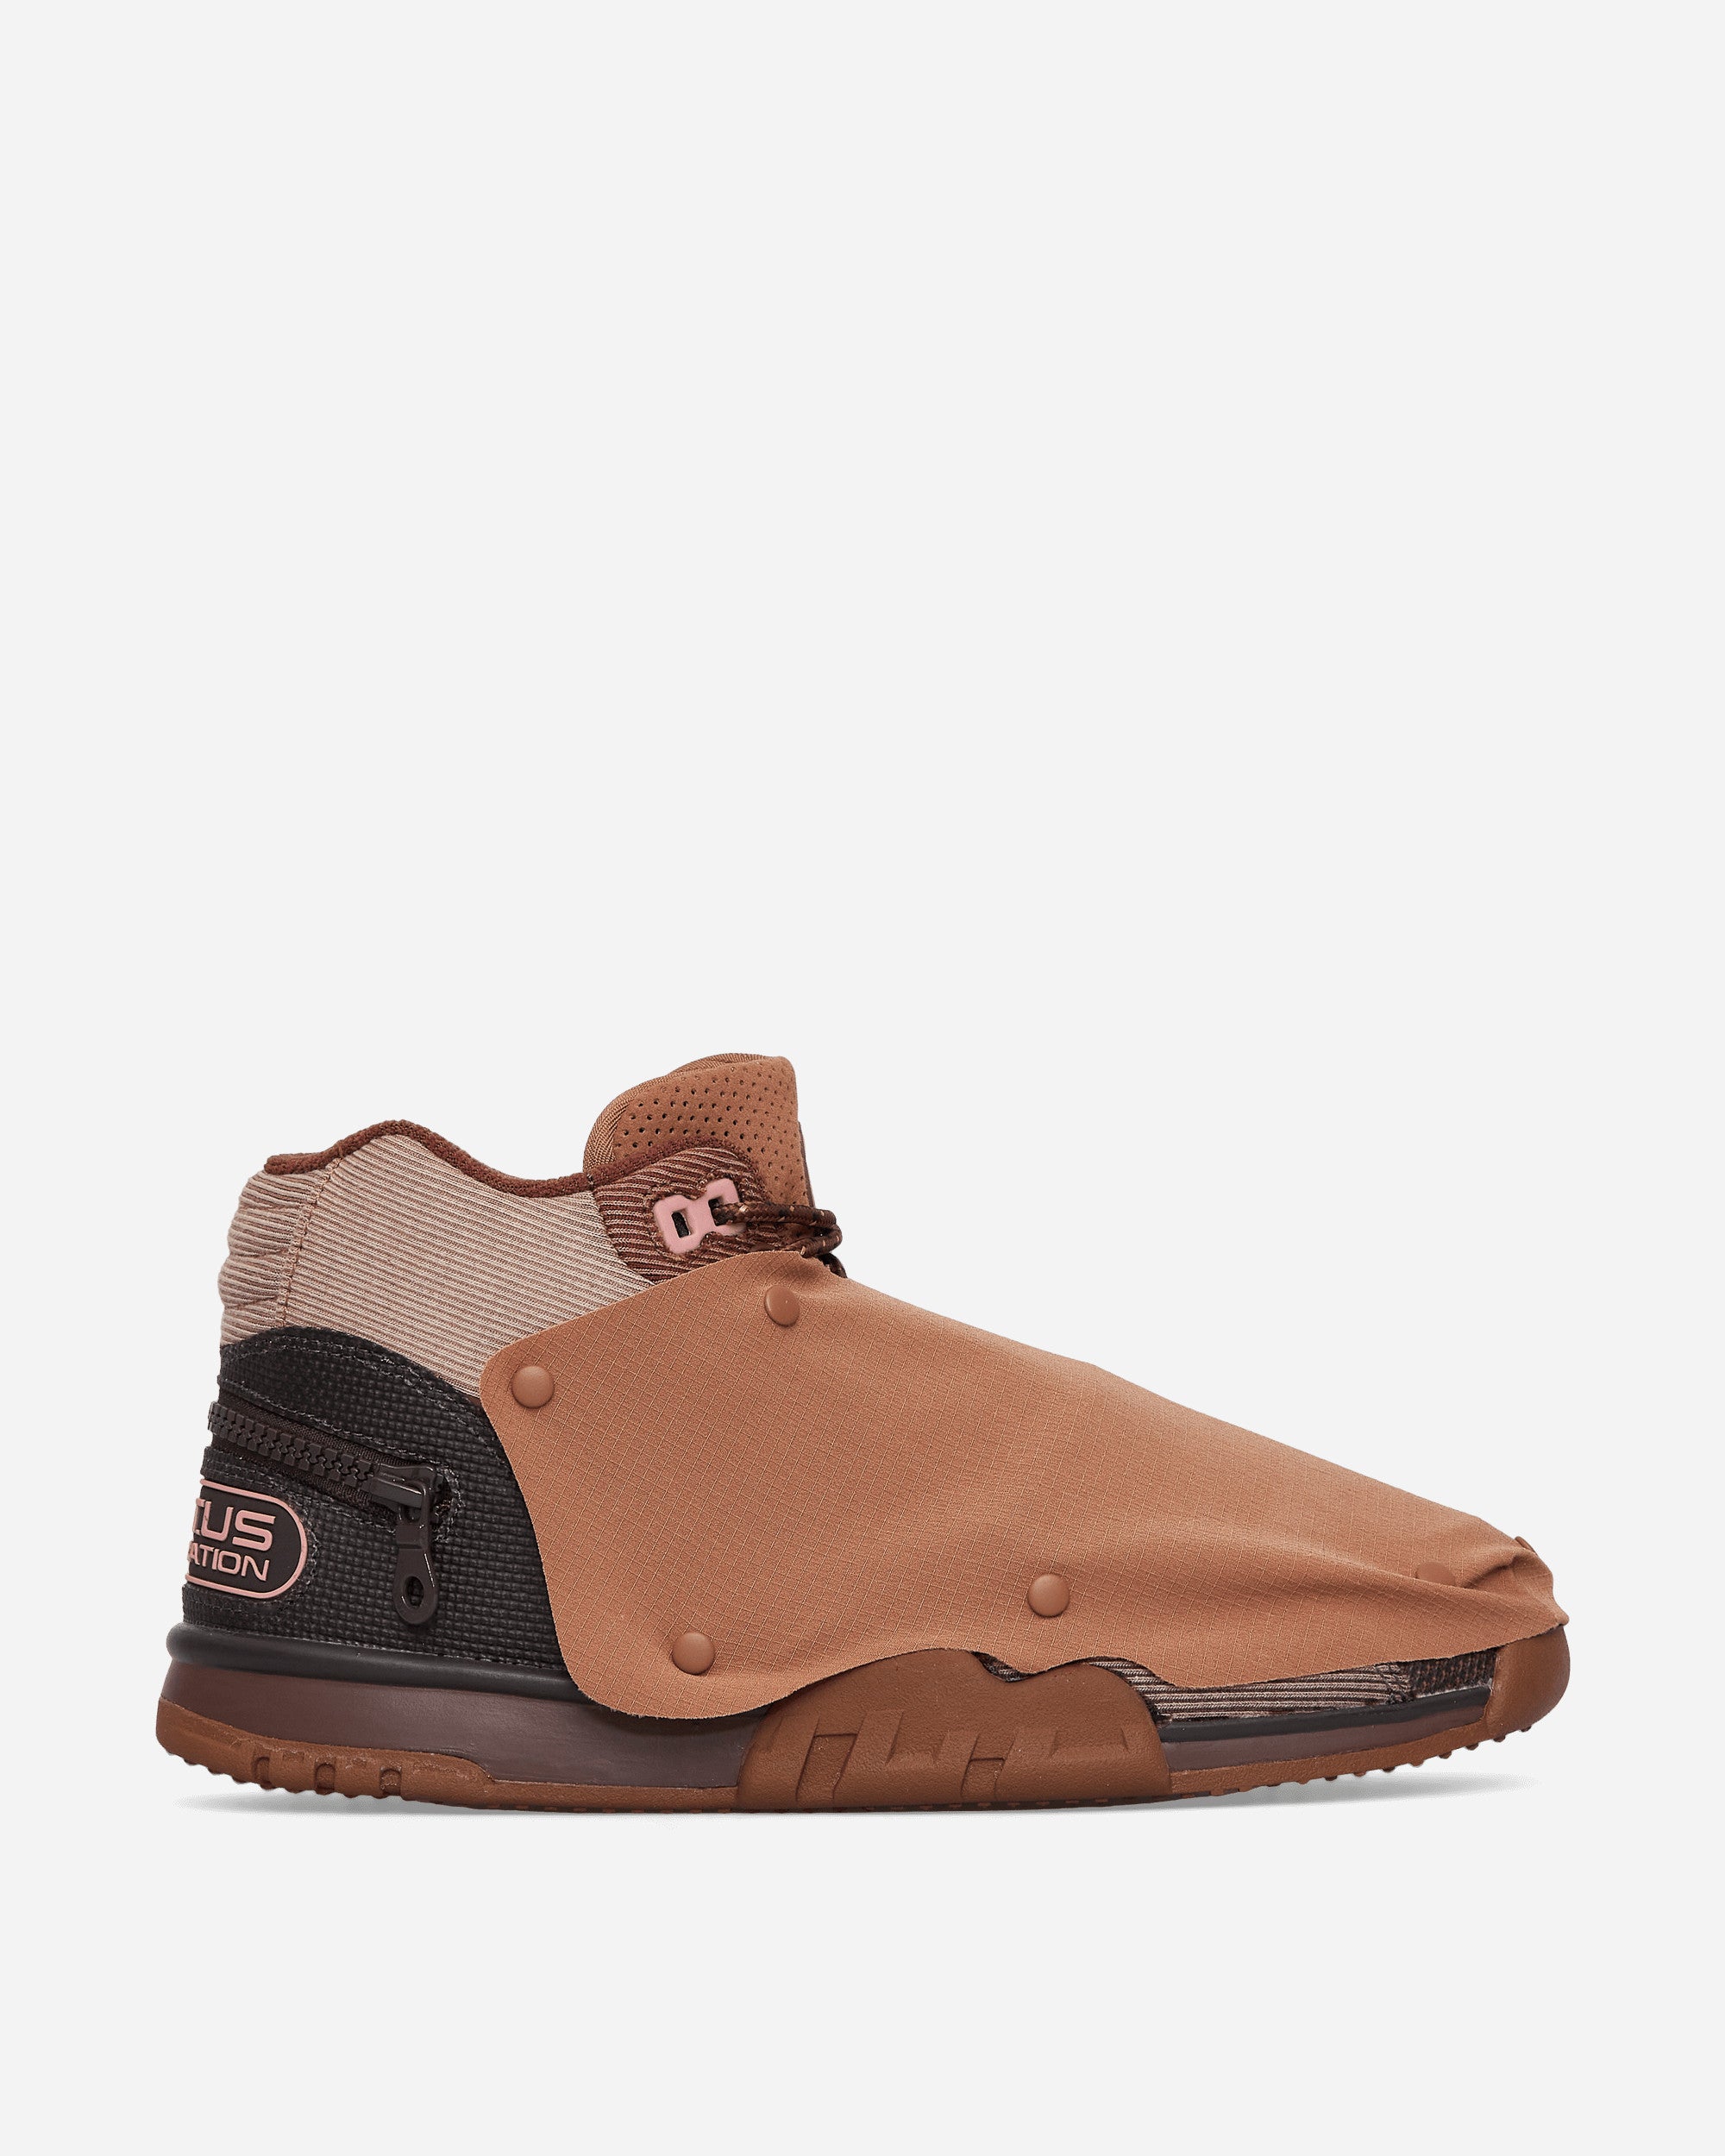 Nike Special Project Air Trainer 1 / Cj Lt Chocolate/Rust Pink Sneakers Low DR7515-200